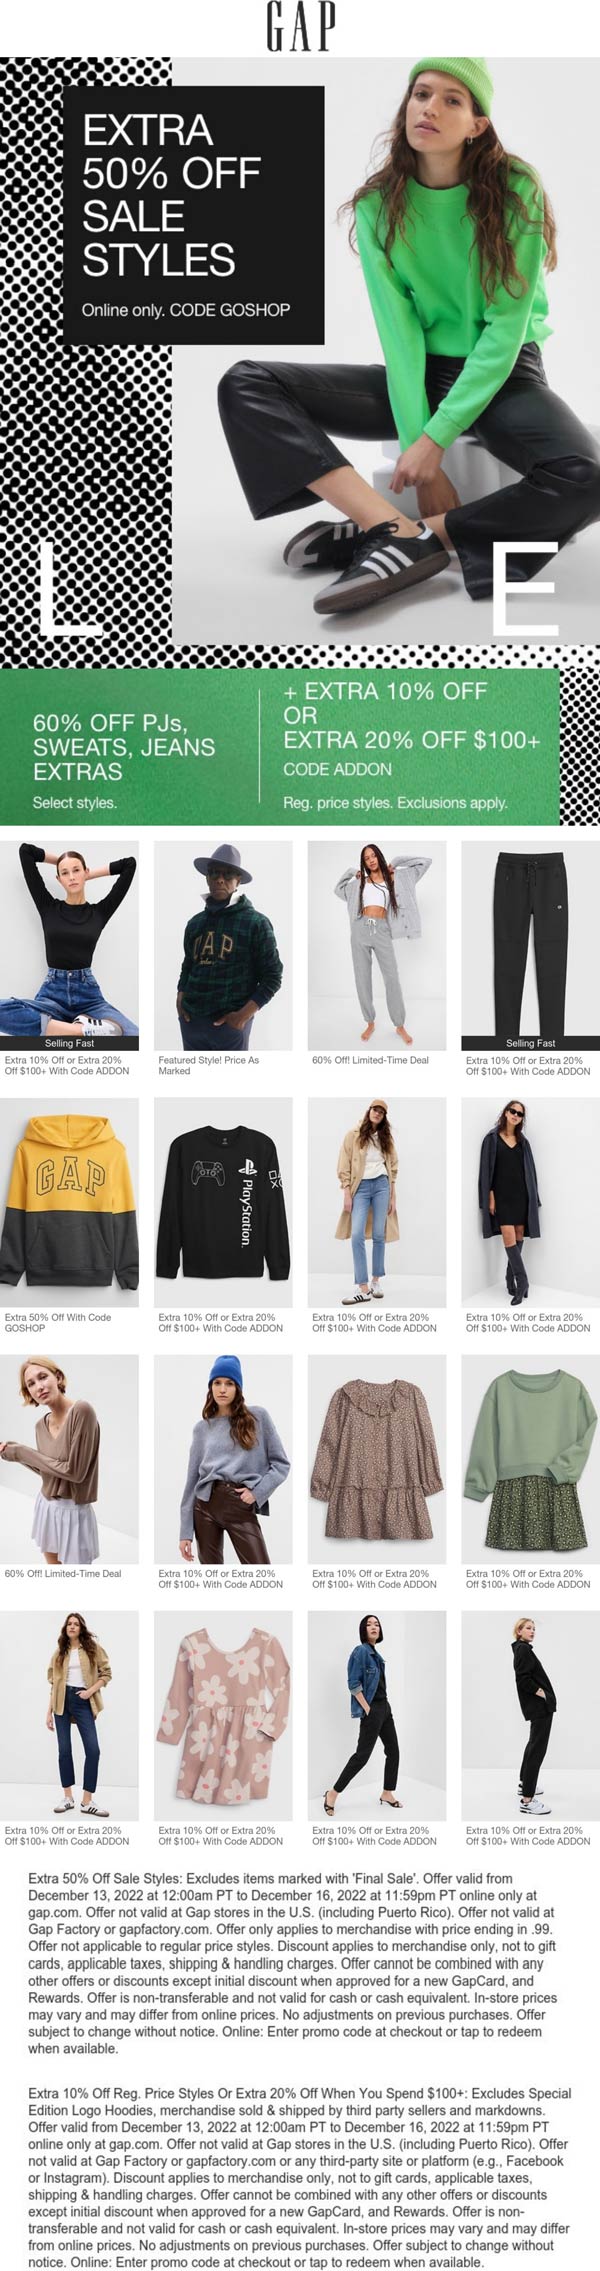 Gap coupons & promo code for [February 2023]